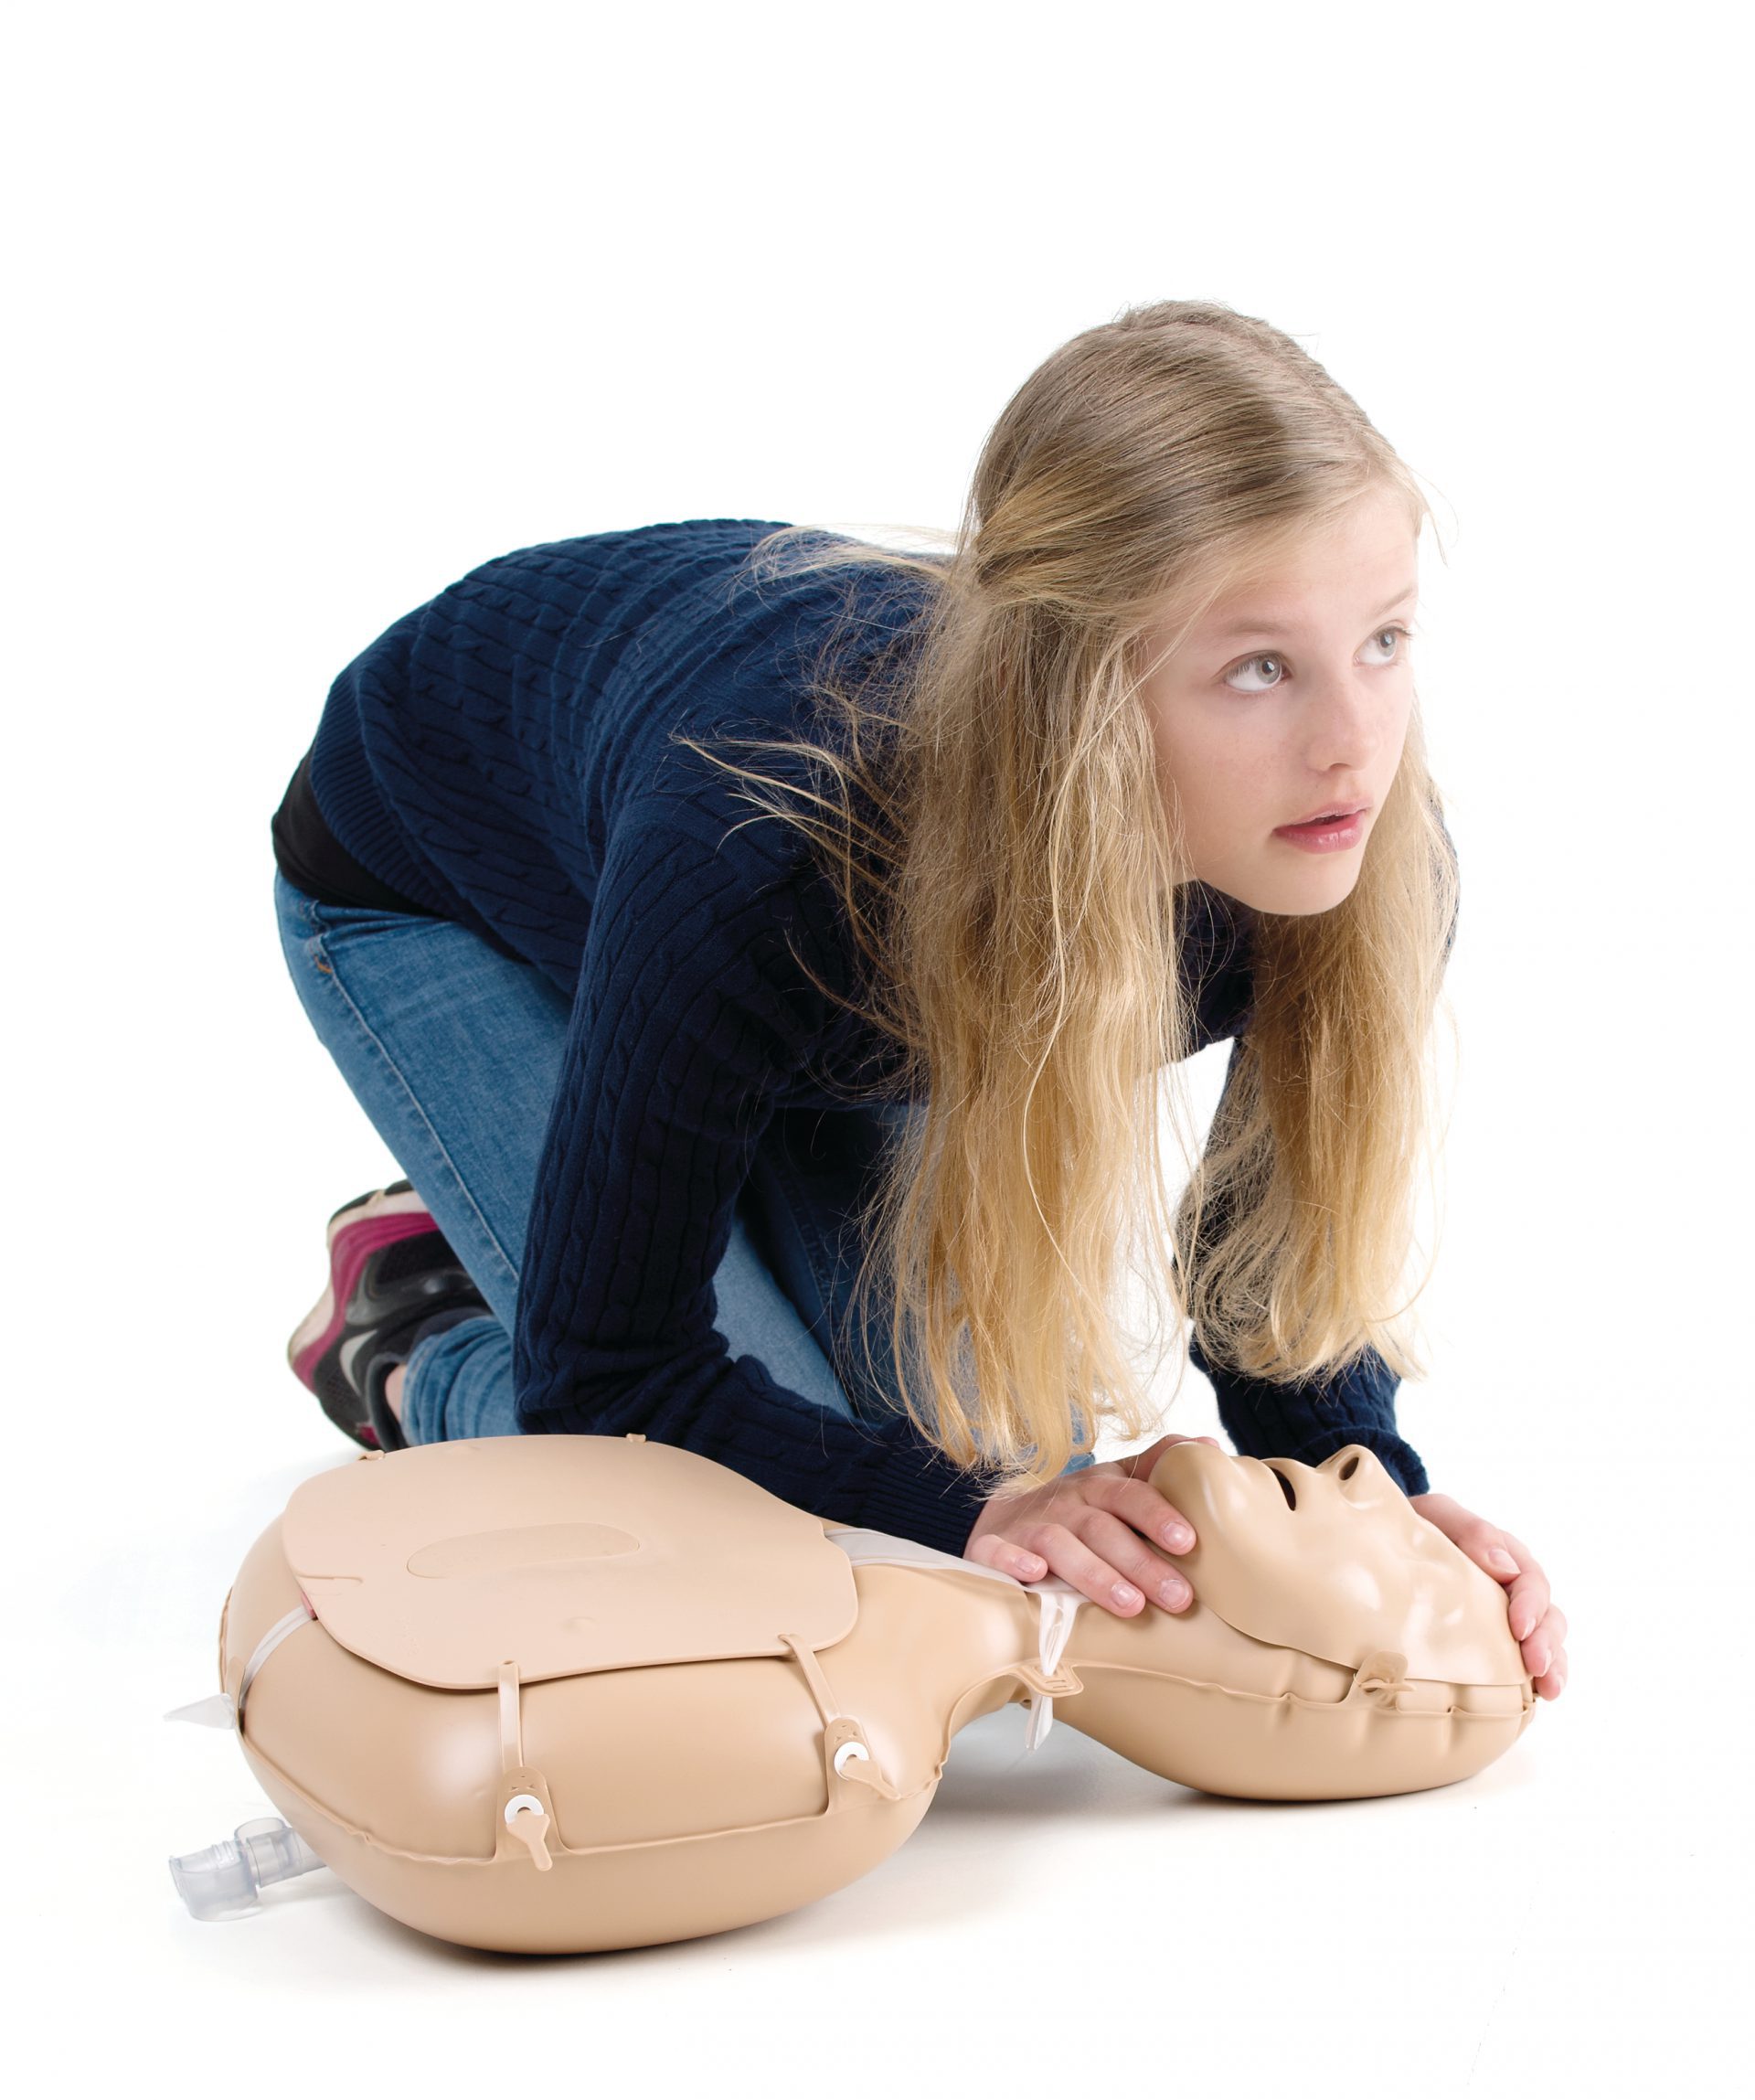 13-year old Hanne Haug, in Våland School, Stavanger, training to become a life saver.